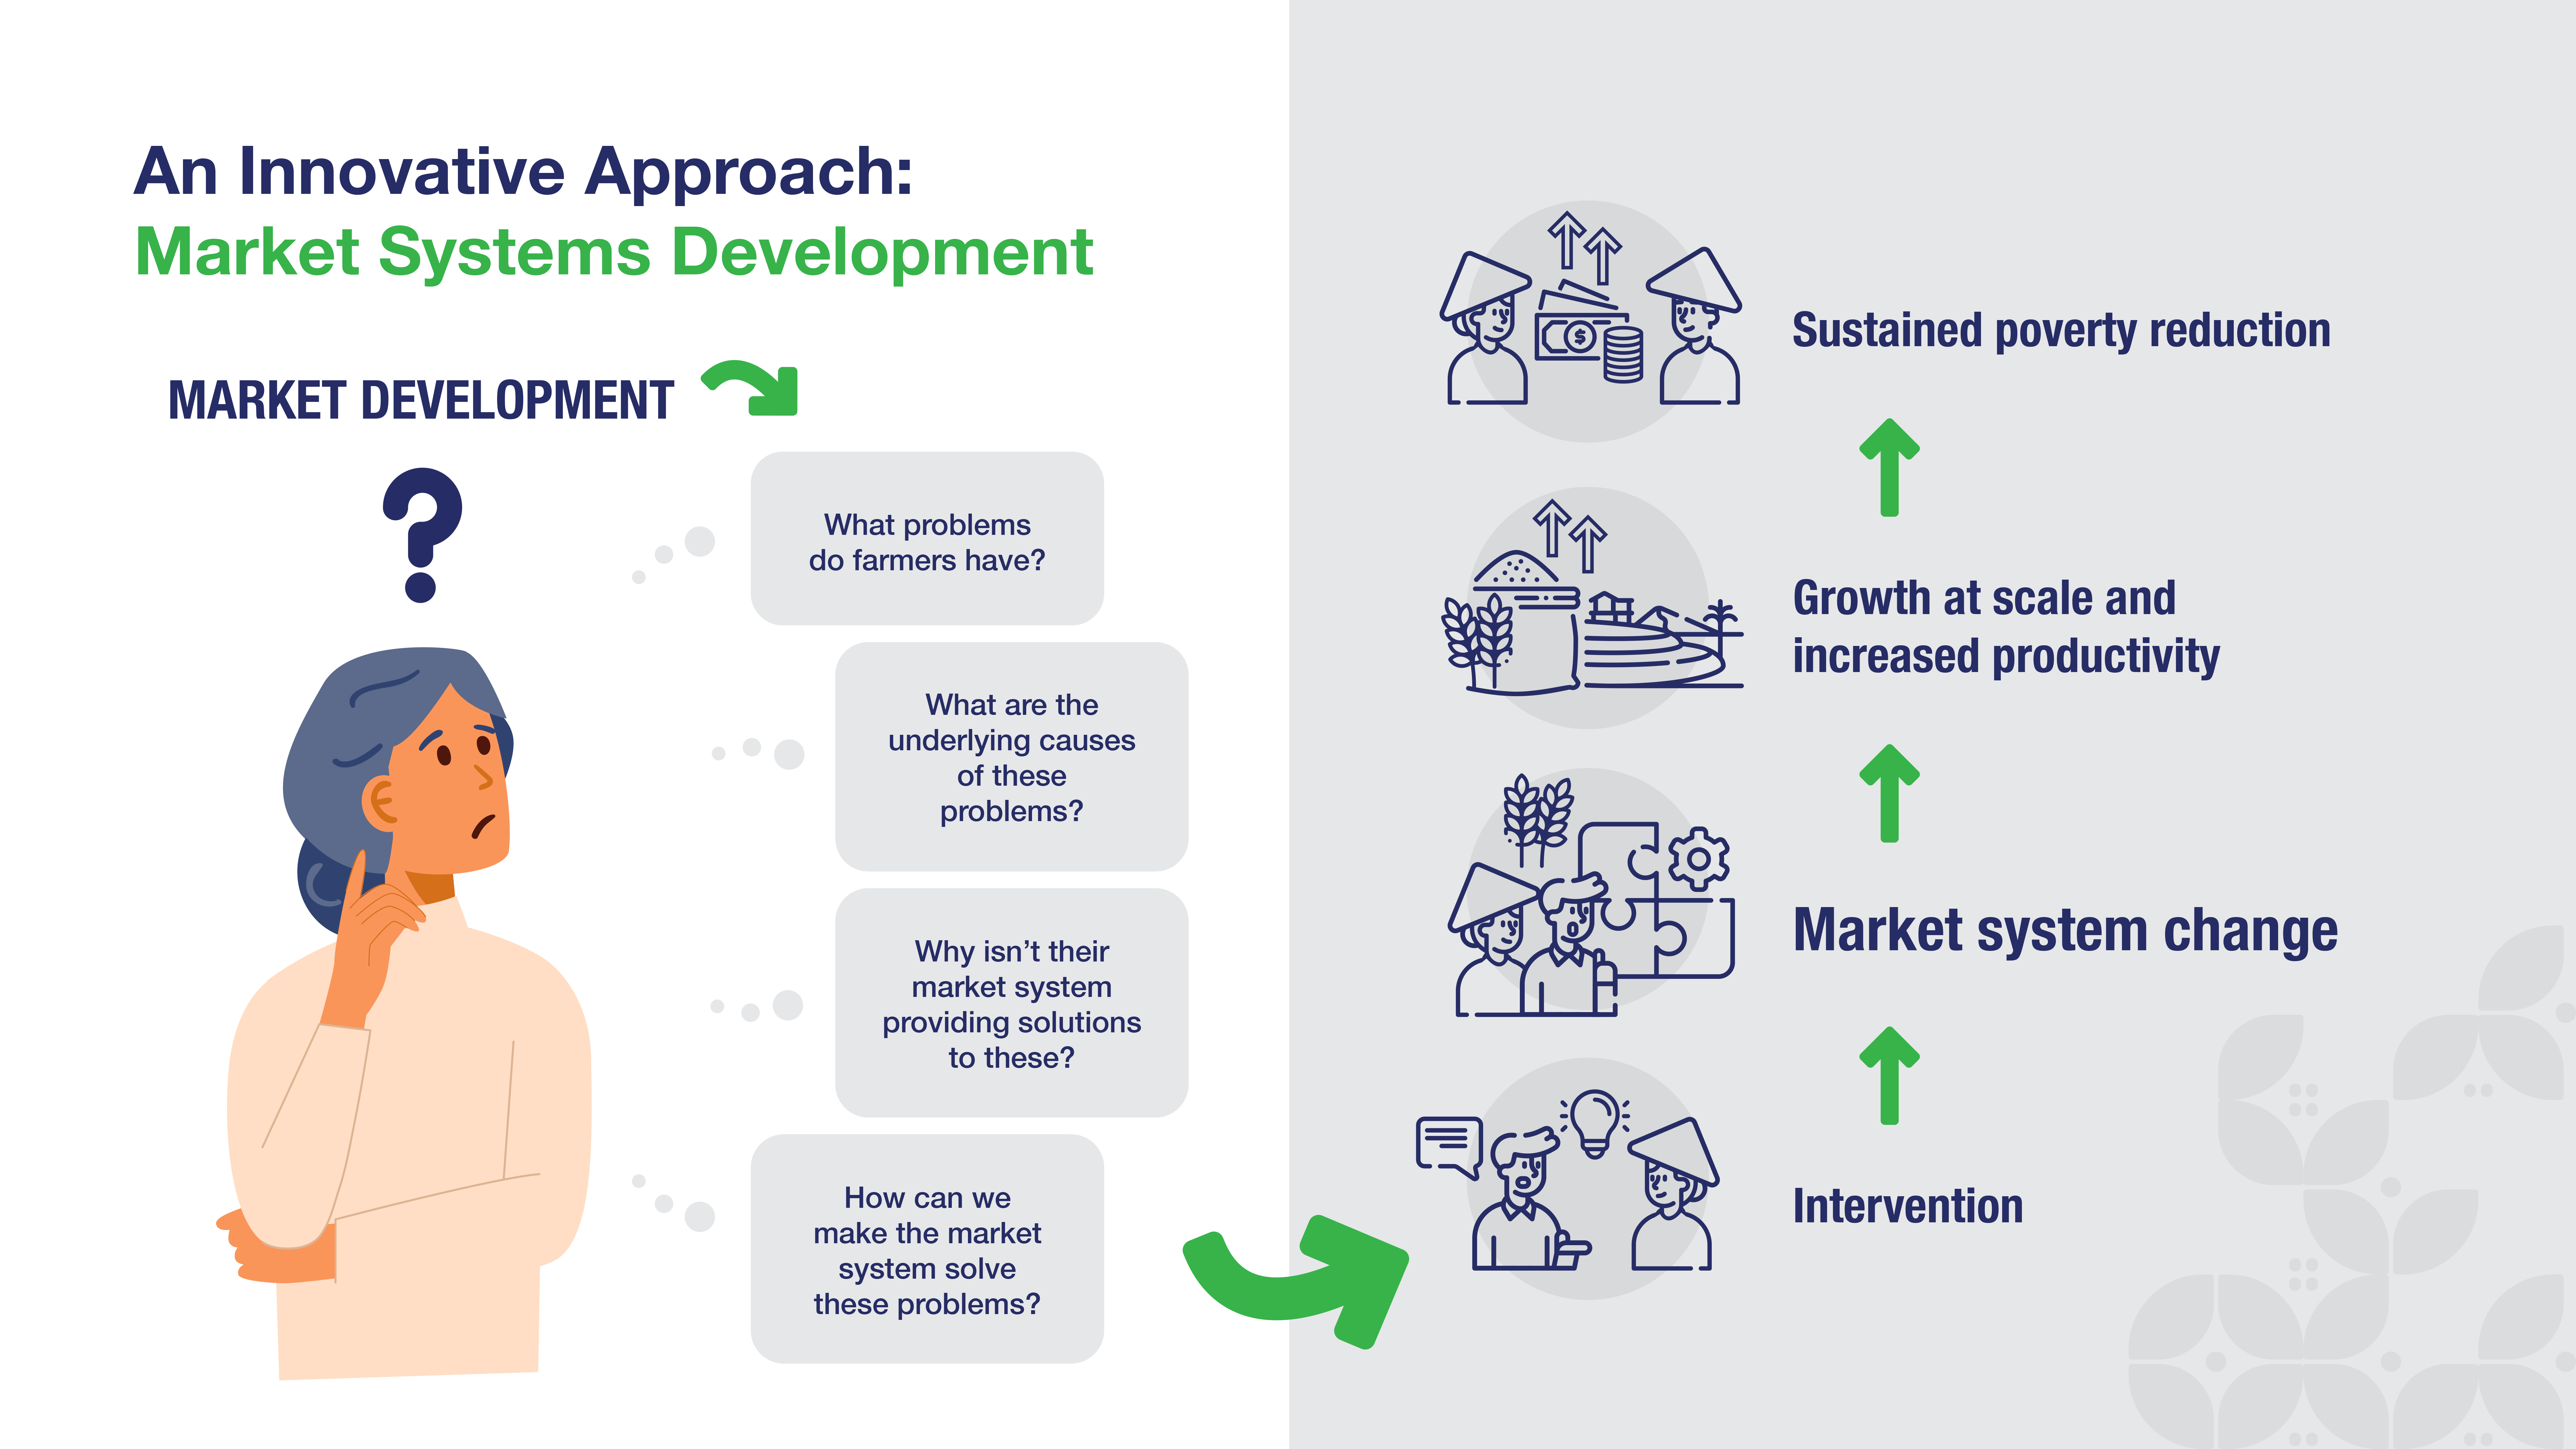 infographic about market systems development as an innovative approach that can lead to a sustained poverty reduction